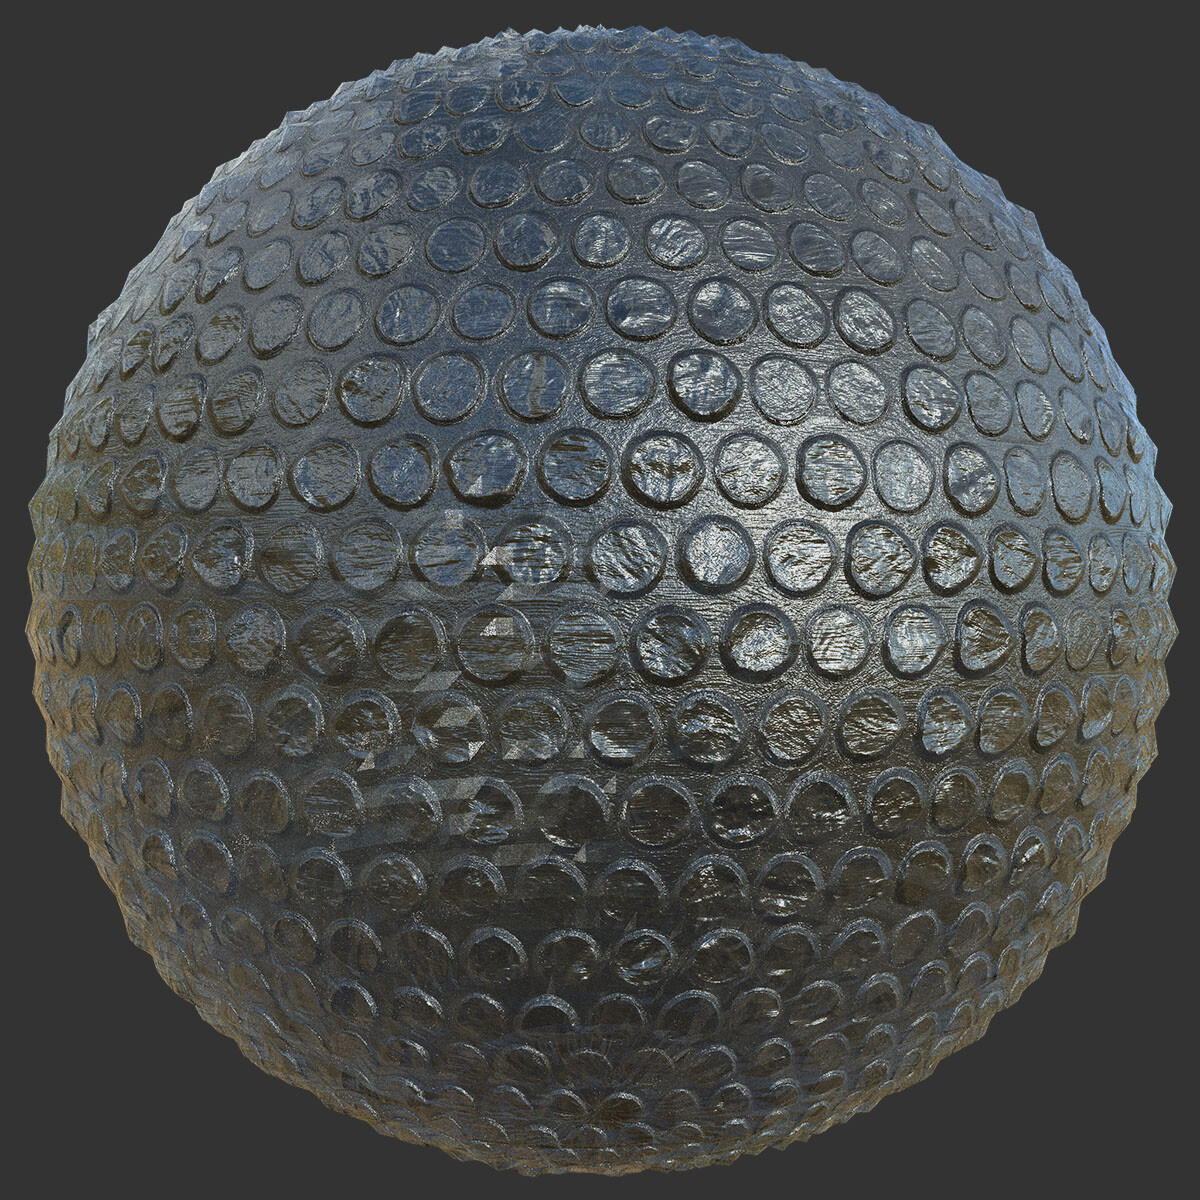 ArtStation - Bubble Wrap Texture for Packaging